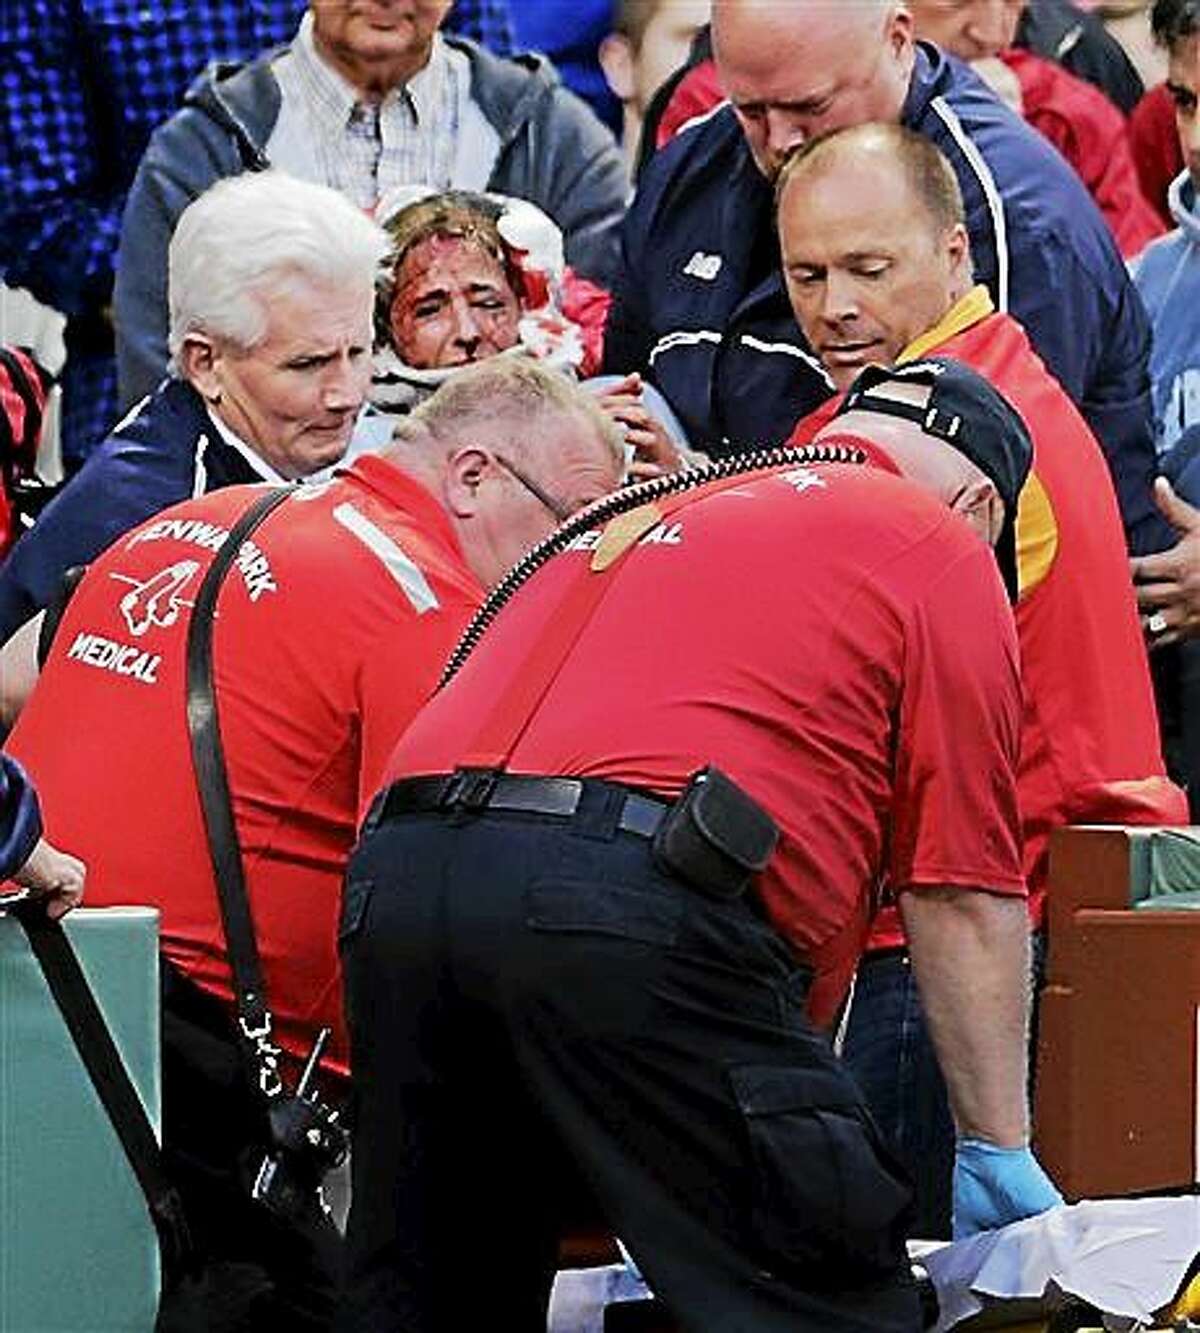 A fan, who was accidentally hit in the head with a broken bat by Oakland Athletics' Brett Lawrie, is helped from the stands during a baseball game against the Boston Red Sox at Fenway Park in Boston, Friday, June 5, 2015. The game was stopped while they wheeled her down the first base line. (AP Photo/Charles Krupa)